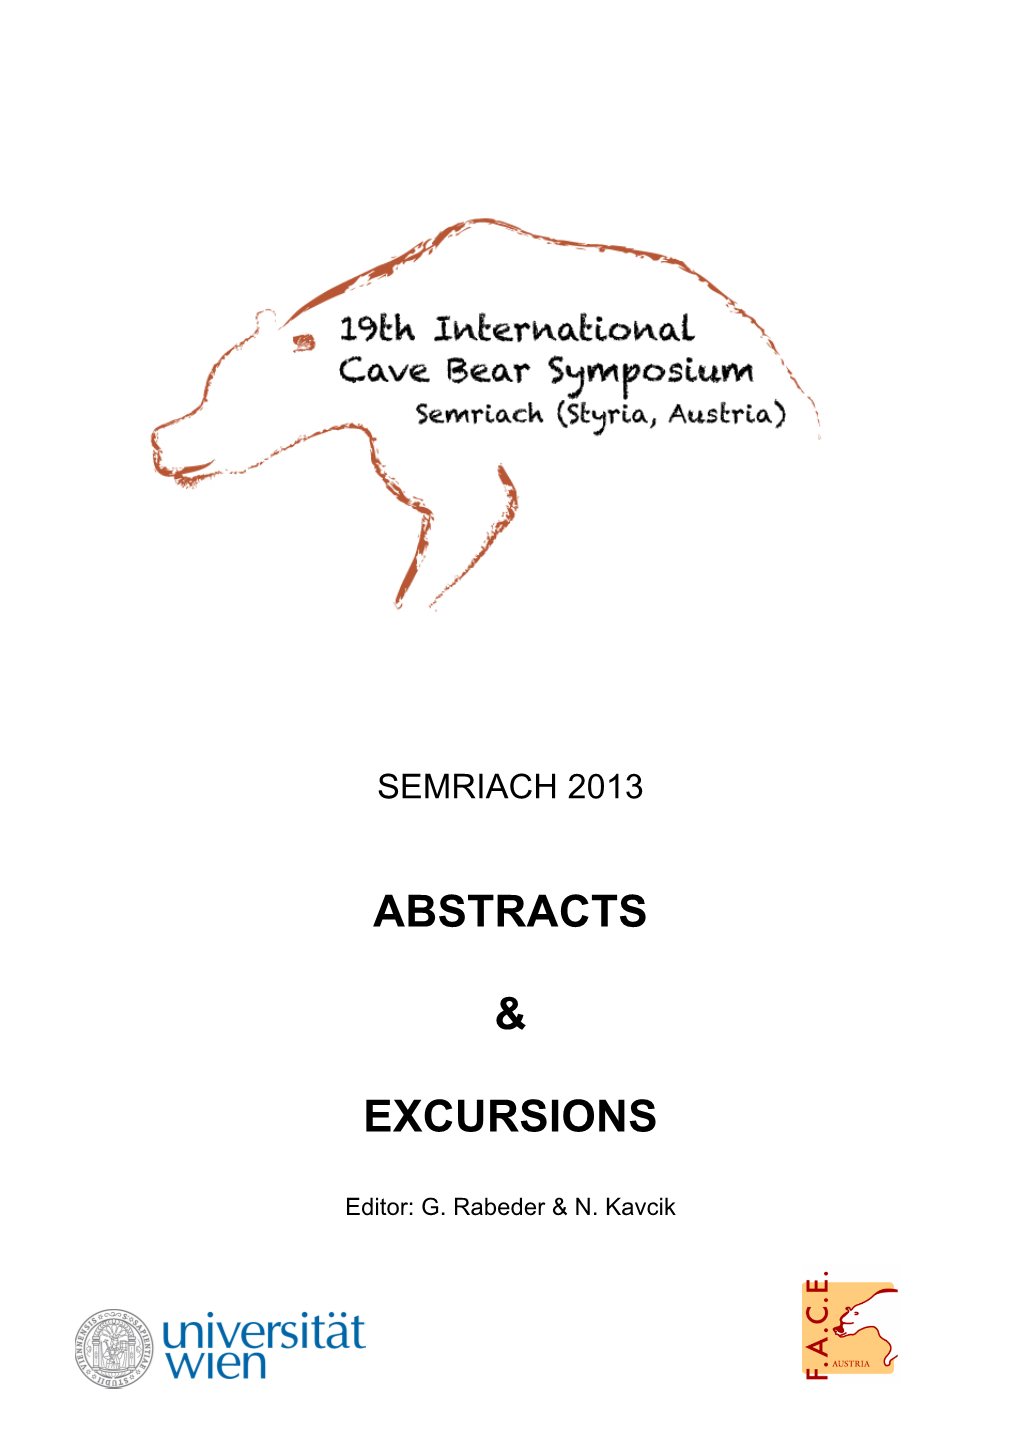 Abstracts & Excursions